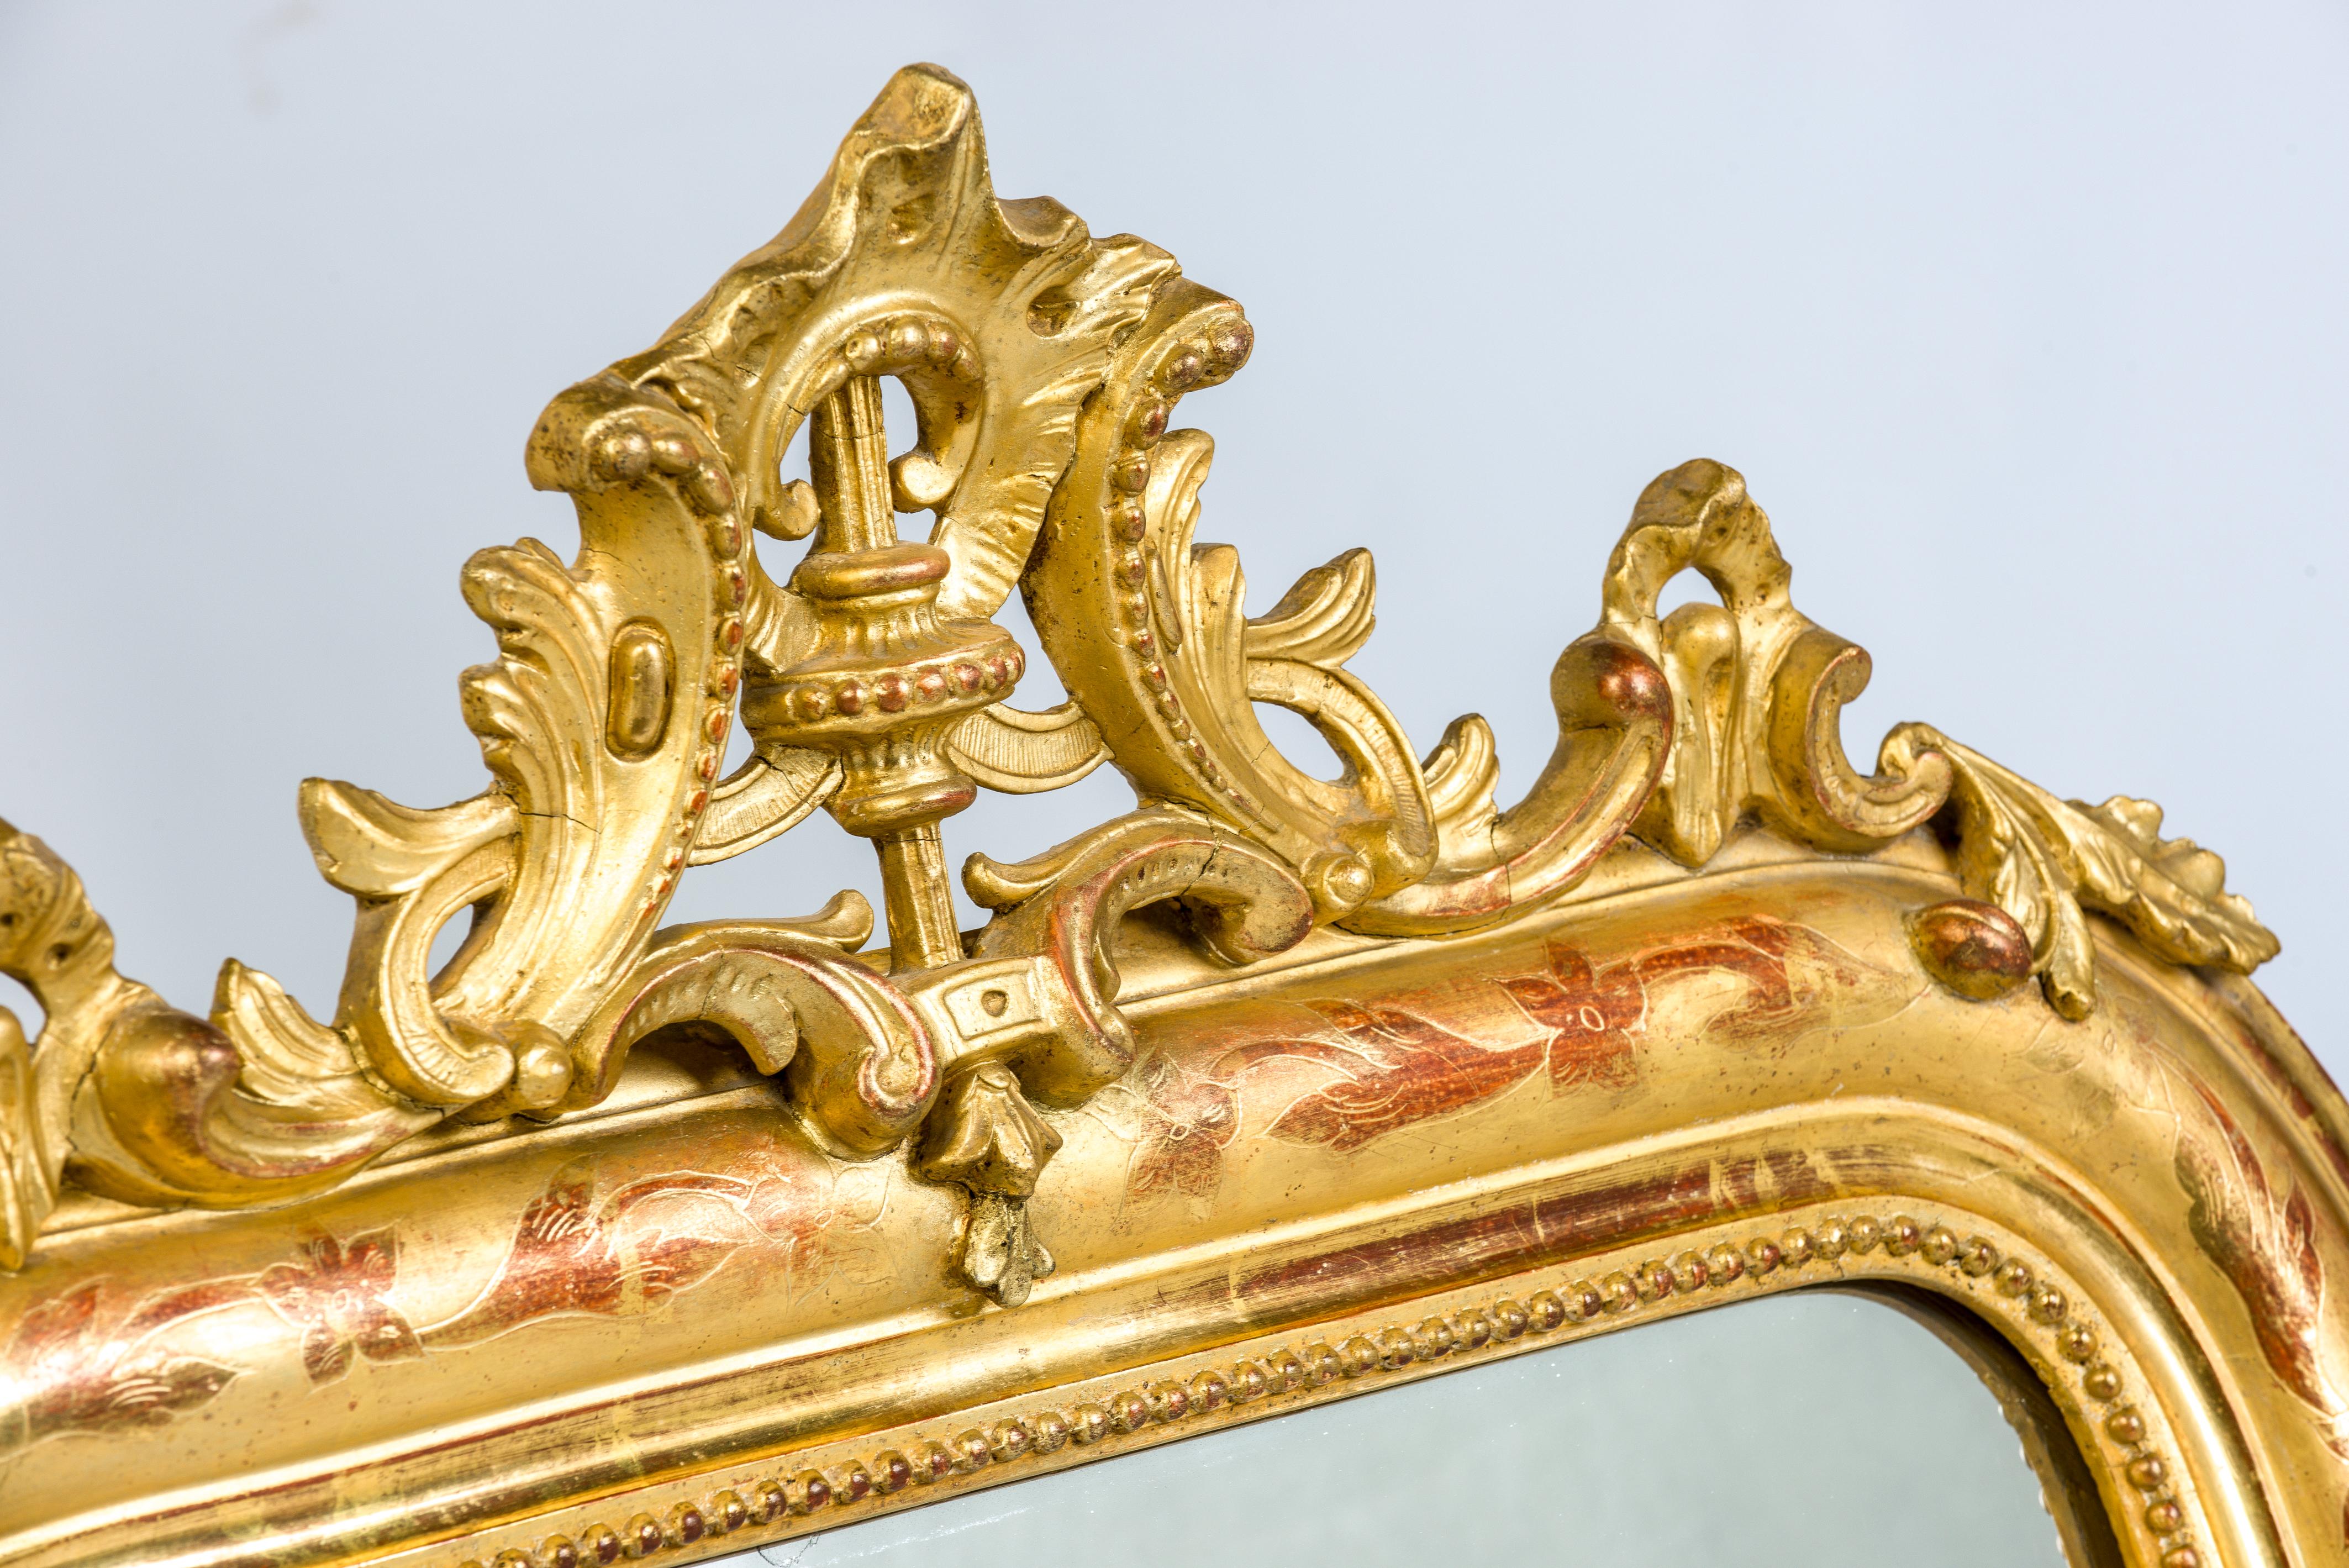 This beautiful gold leaf gilded Louis Philippe mirror has an ornate crest on top.
The upper corners are curved, as is typical for Louis Philippe.
Both frame and crest are gold leaf gilt. The red 'bole' shines through the gold giving the gold it's